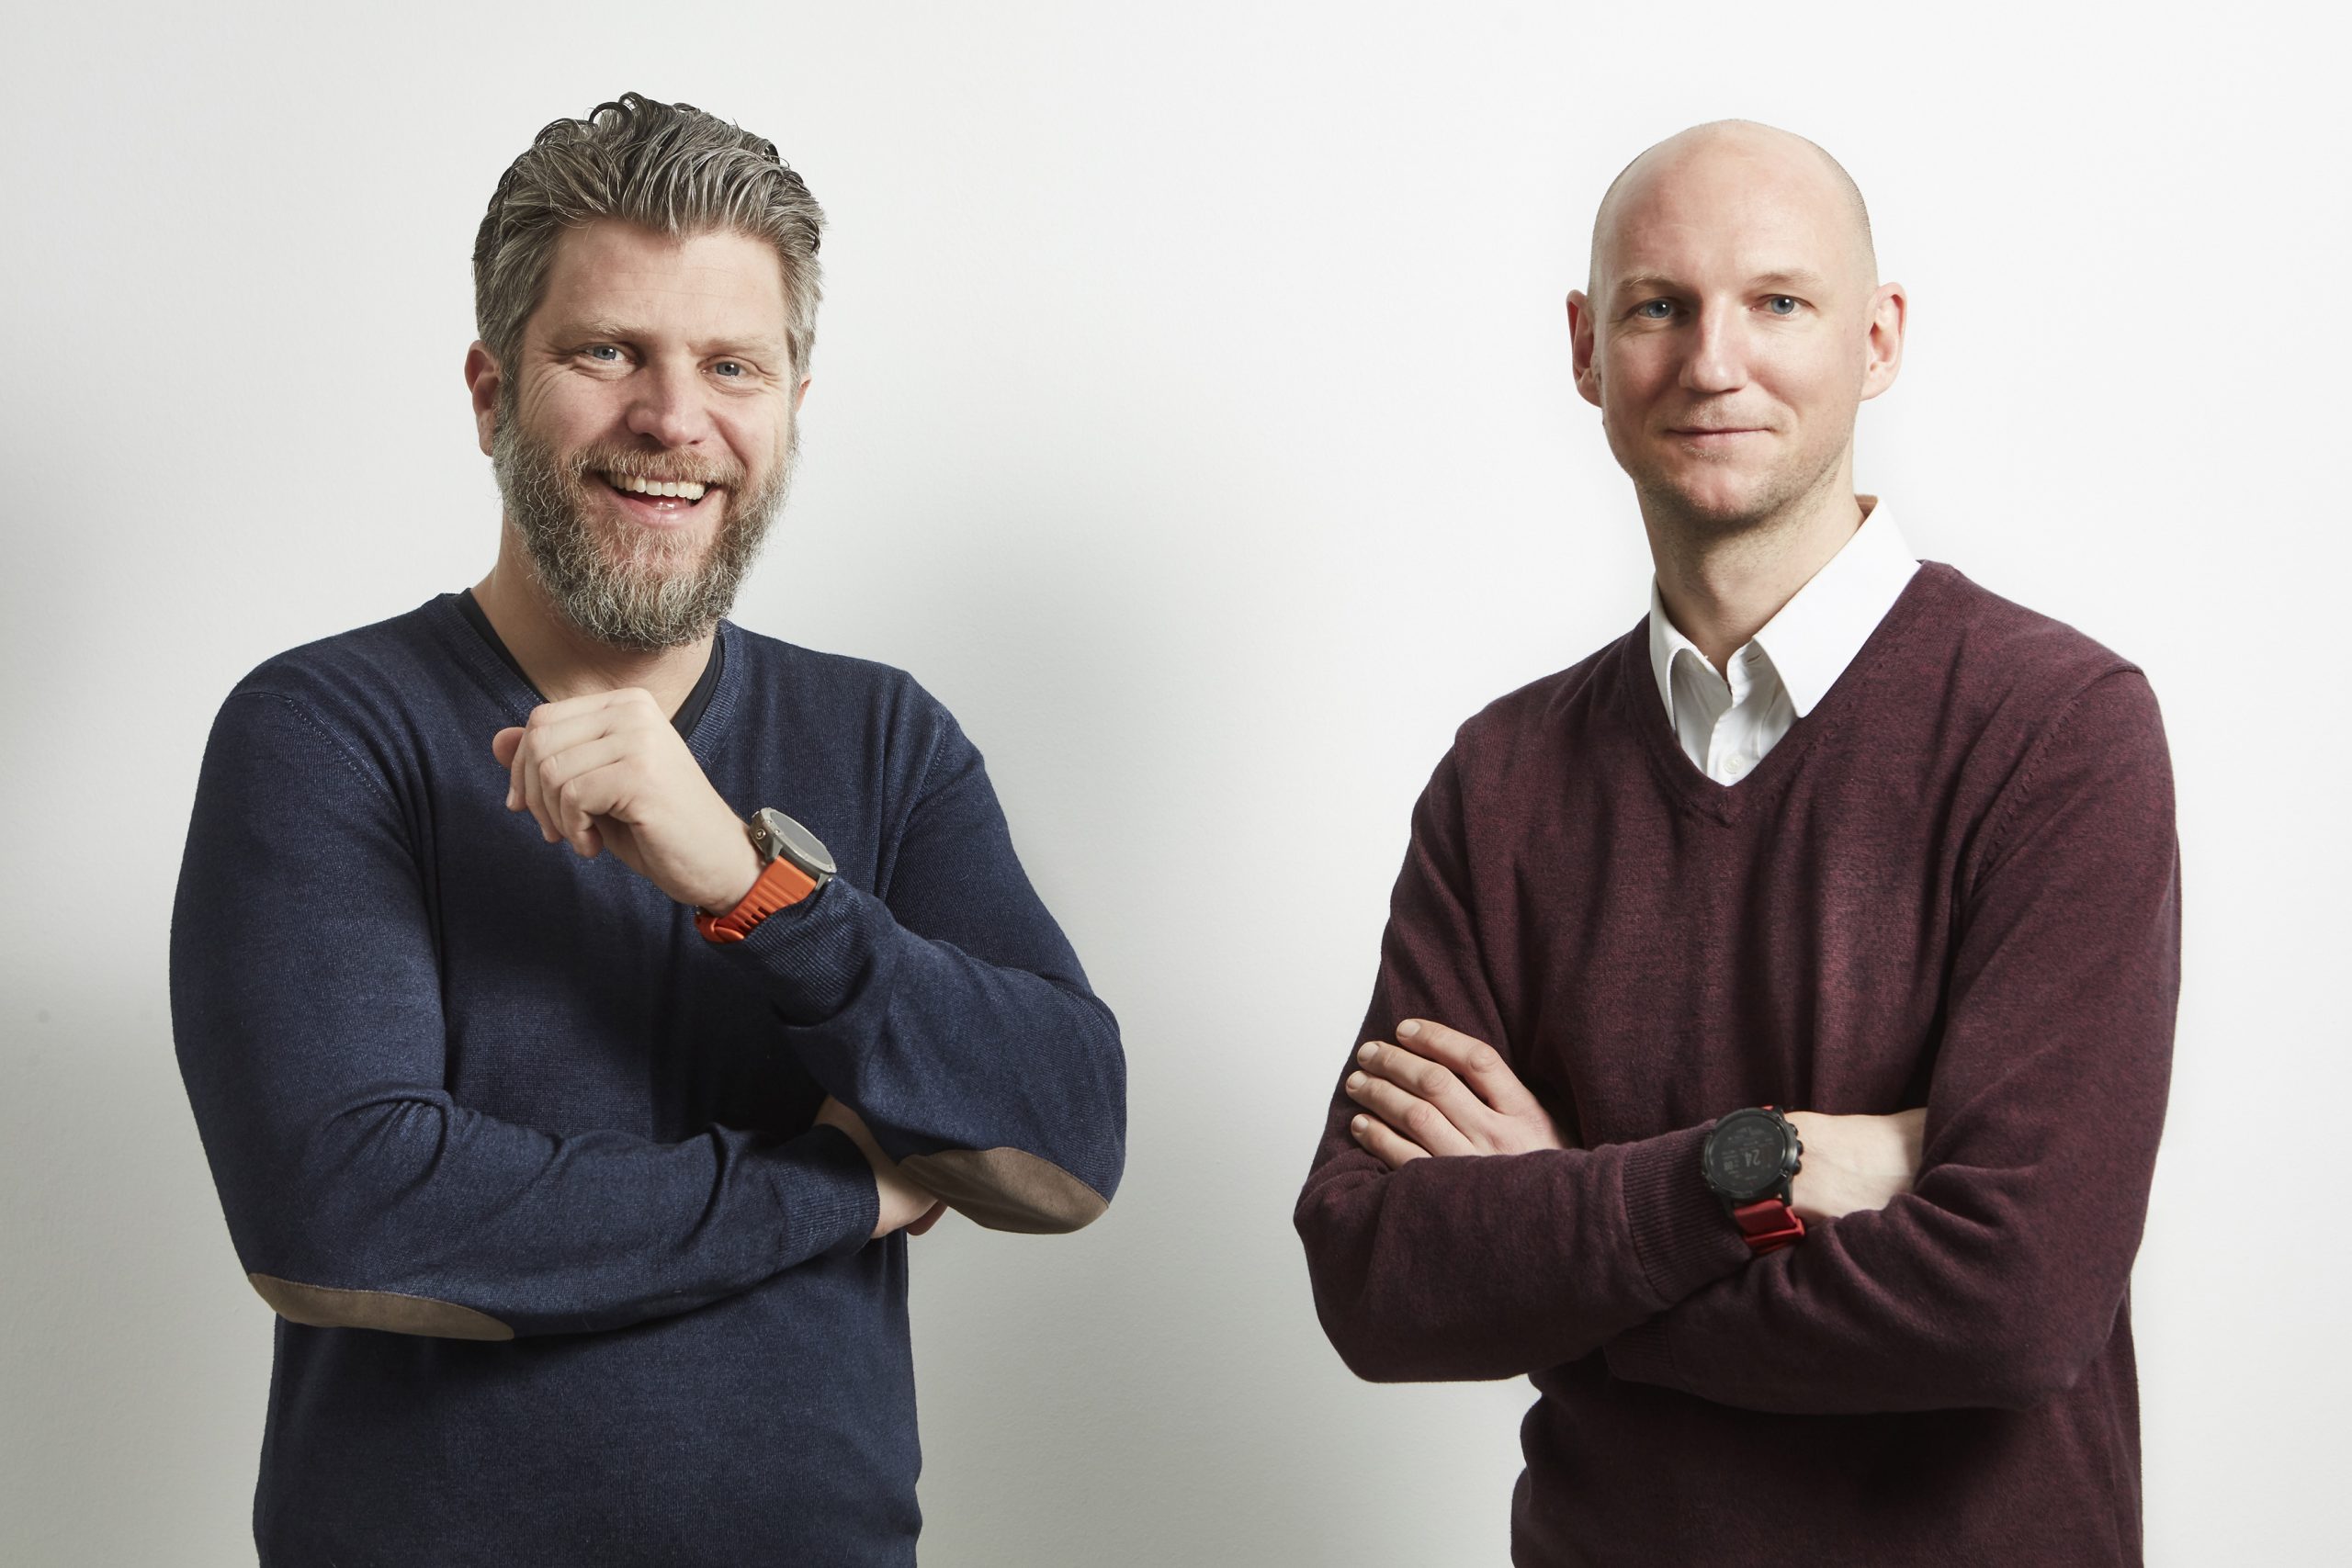 In-Vision CEO Florian Zangerl and CTO Christof Hieger. Photo via Thomas Topf/In-Vision.